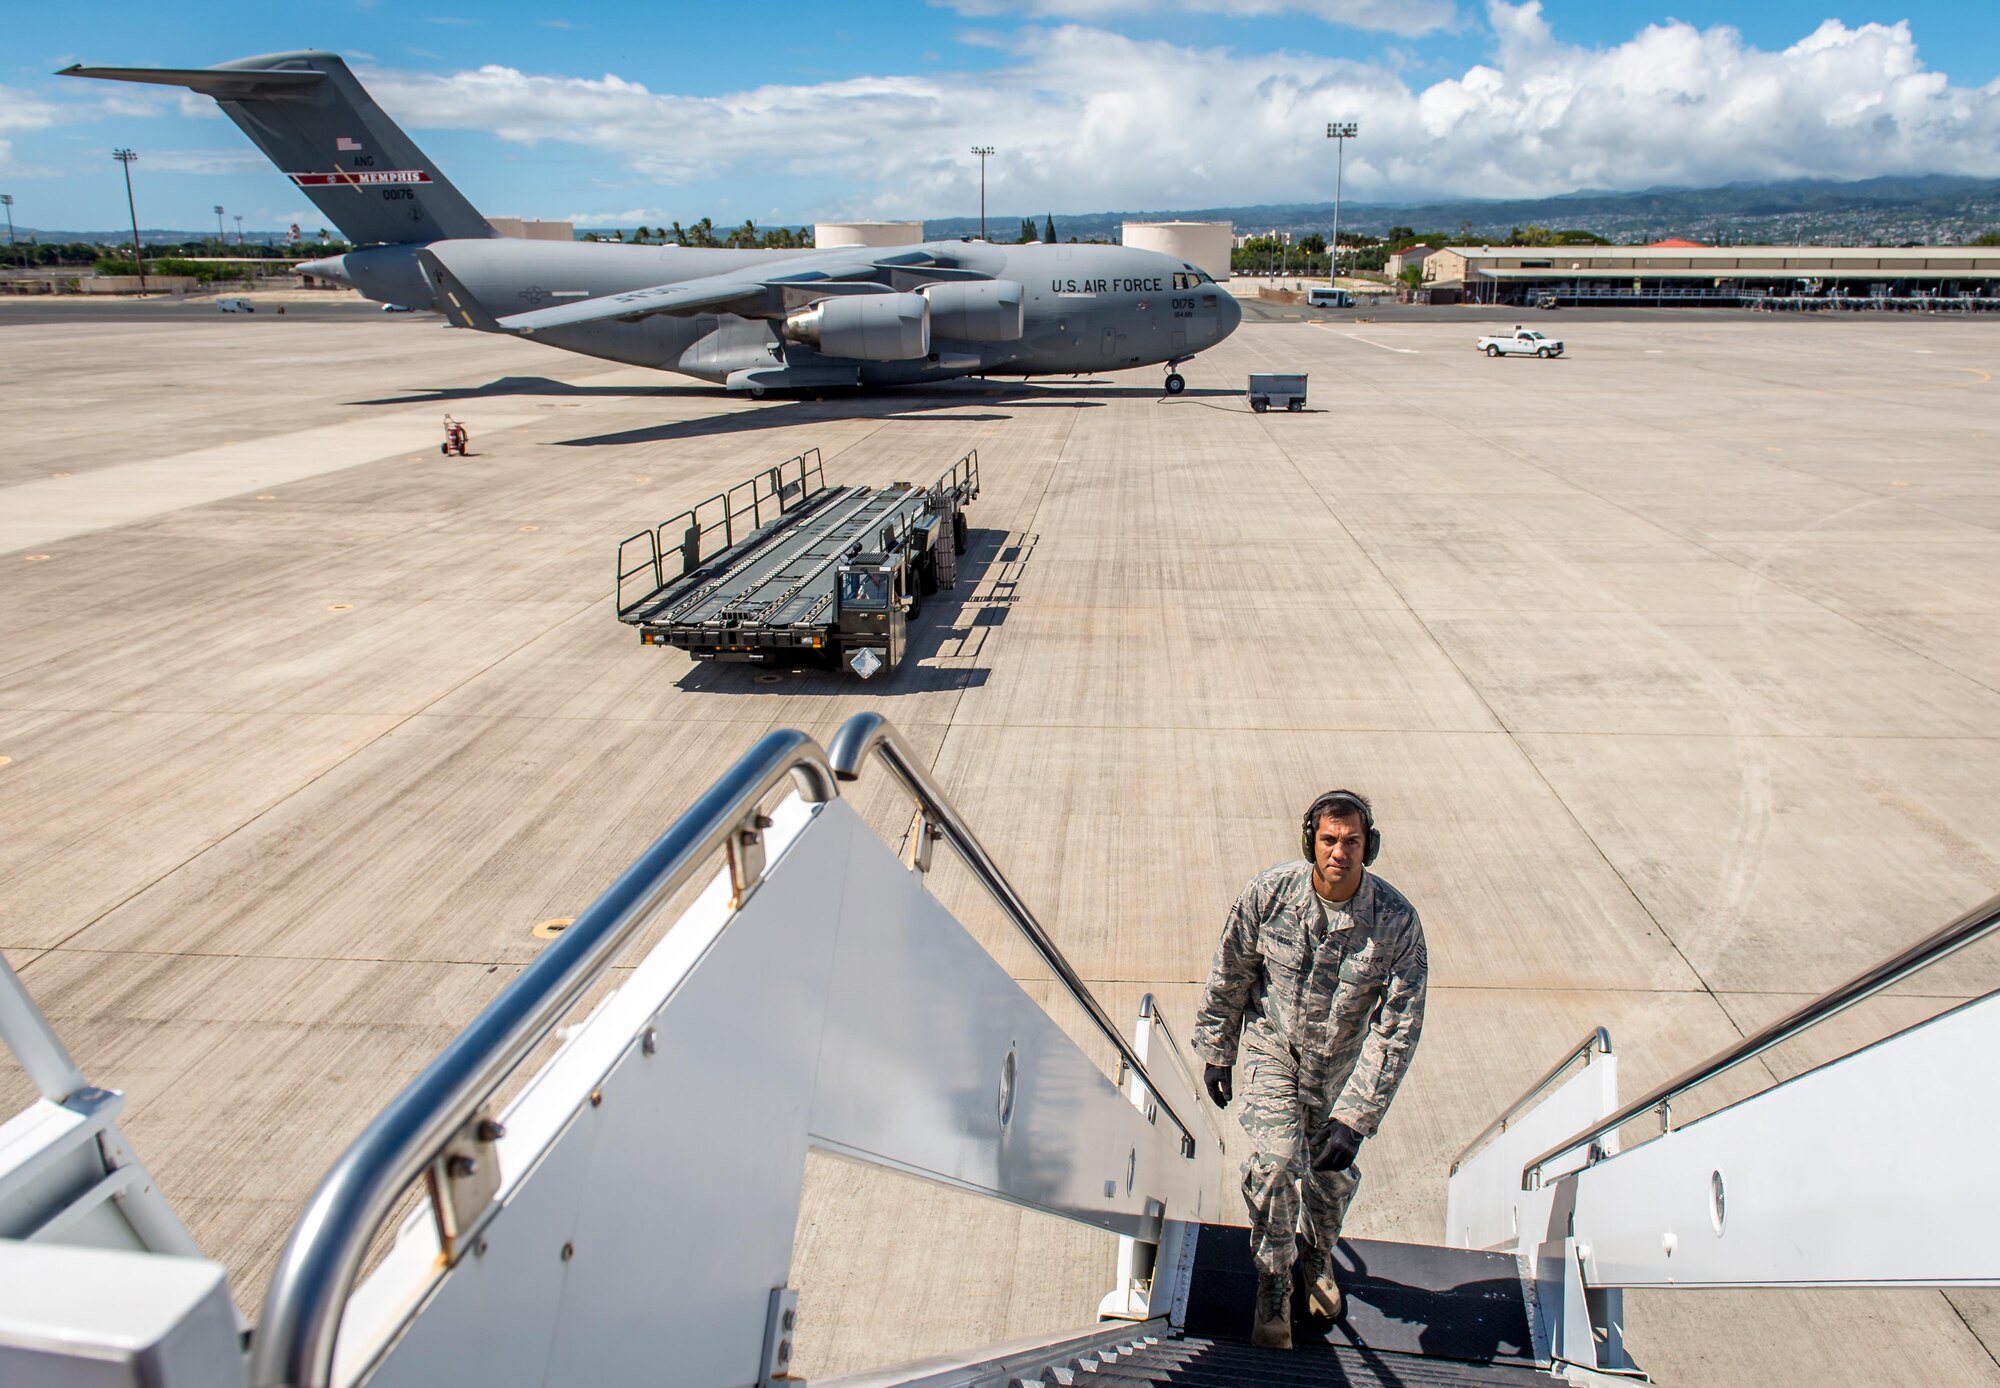 Then Tech. Sgt. Alfred Van Gieson, now Master Sgt., climbs the mobile steps leading to a C-135 waiting to transfer cargo at the 48th Aerial Port Squadron, 624th Regional Support Group, Joint Base Pearl Harbor-Hickam, Oahu, Hawaii, Aug 13, 2016. Van Gieson, an Air Force reservist, is a veteran of Operation Iraqi Freedom, a world champion outrigger, or Va'a, paddler and the coach at the Leeward Kai Canoe Club in Nanakuli, Oahu, which was founded by his grandparents. (U.S. Air Force photo by J.M. Eddins Jr.)